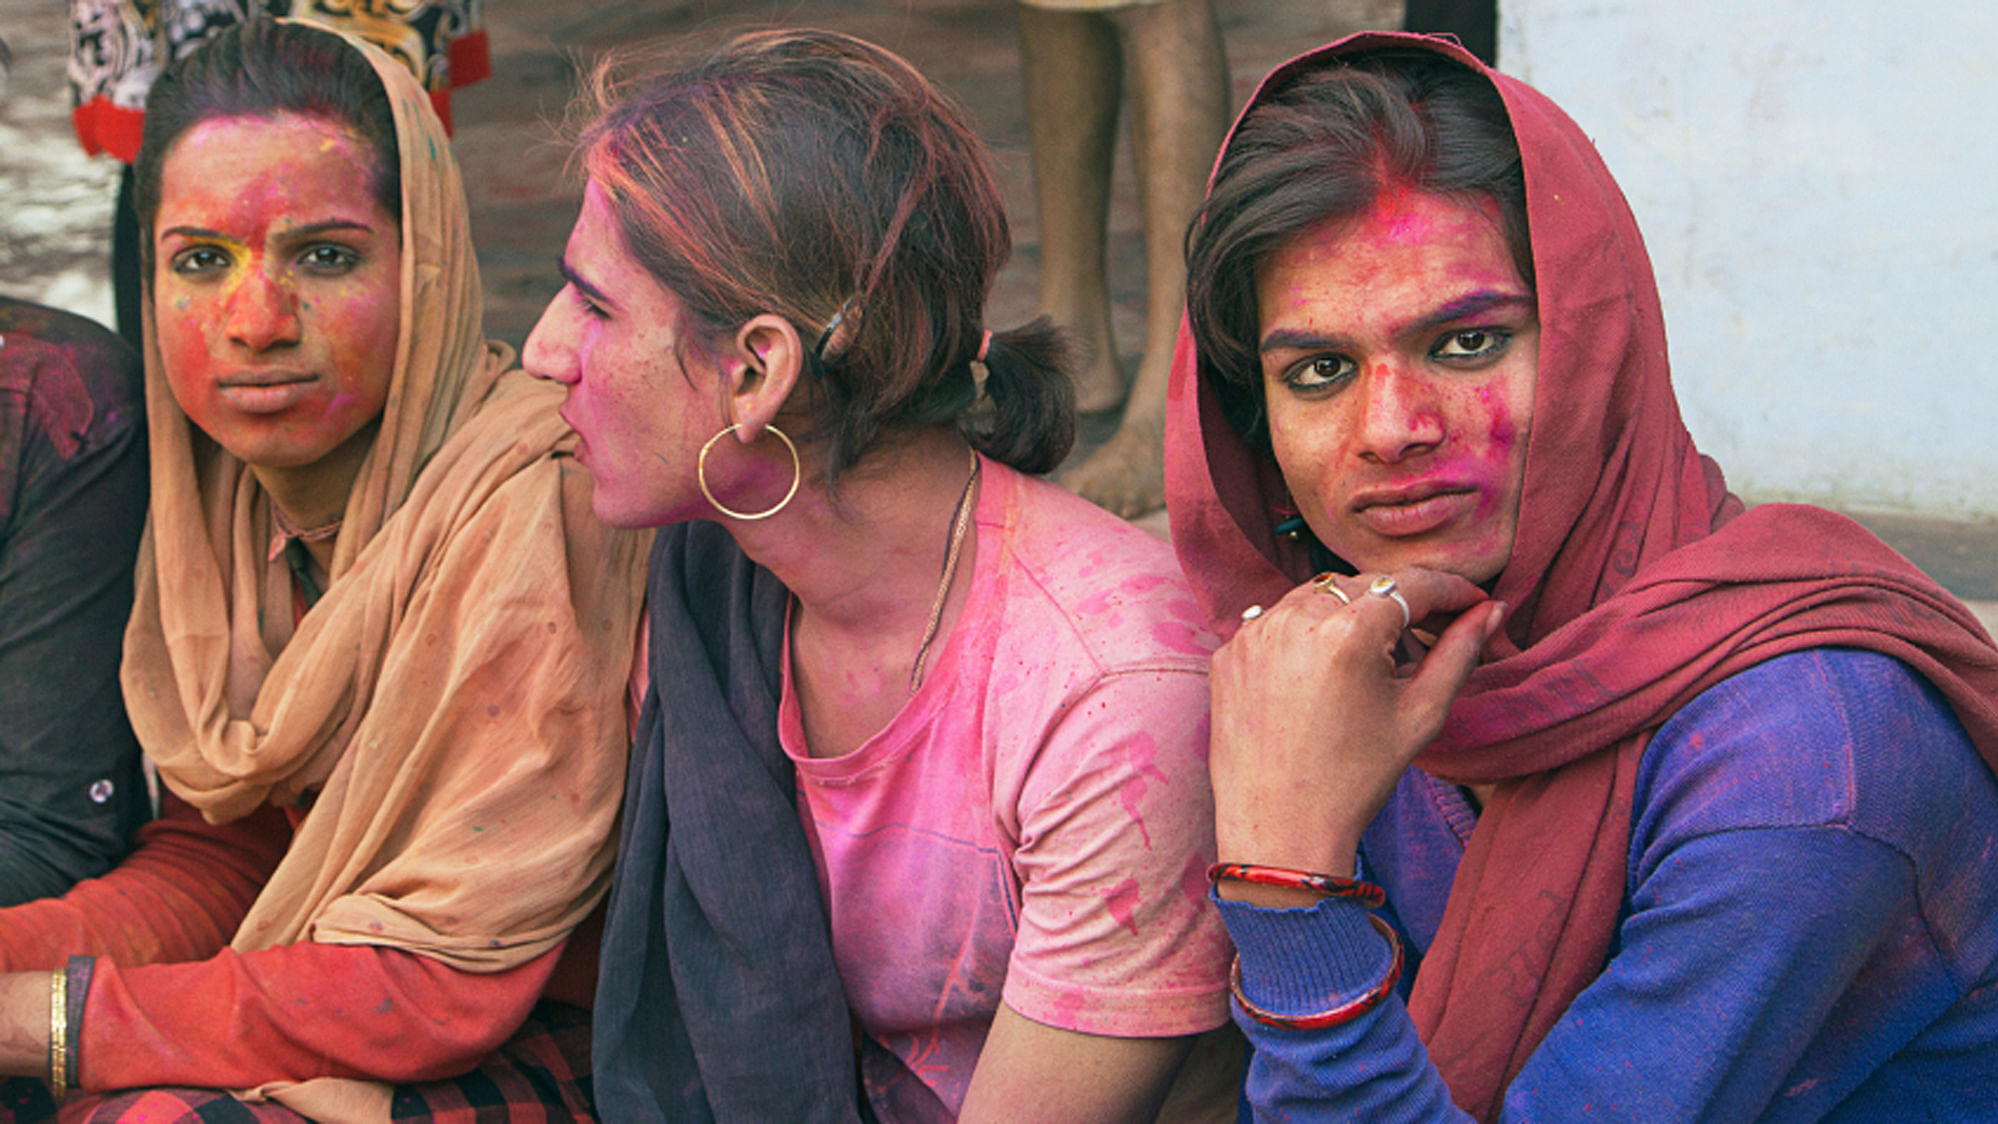 Transgenders in India are struggling to use public restrooms without judgement. (Photo: iStock)